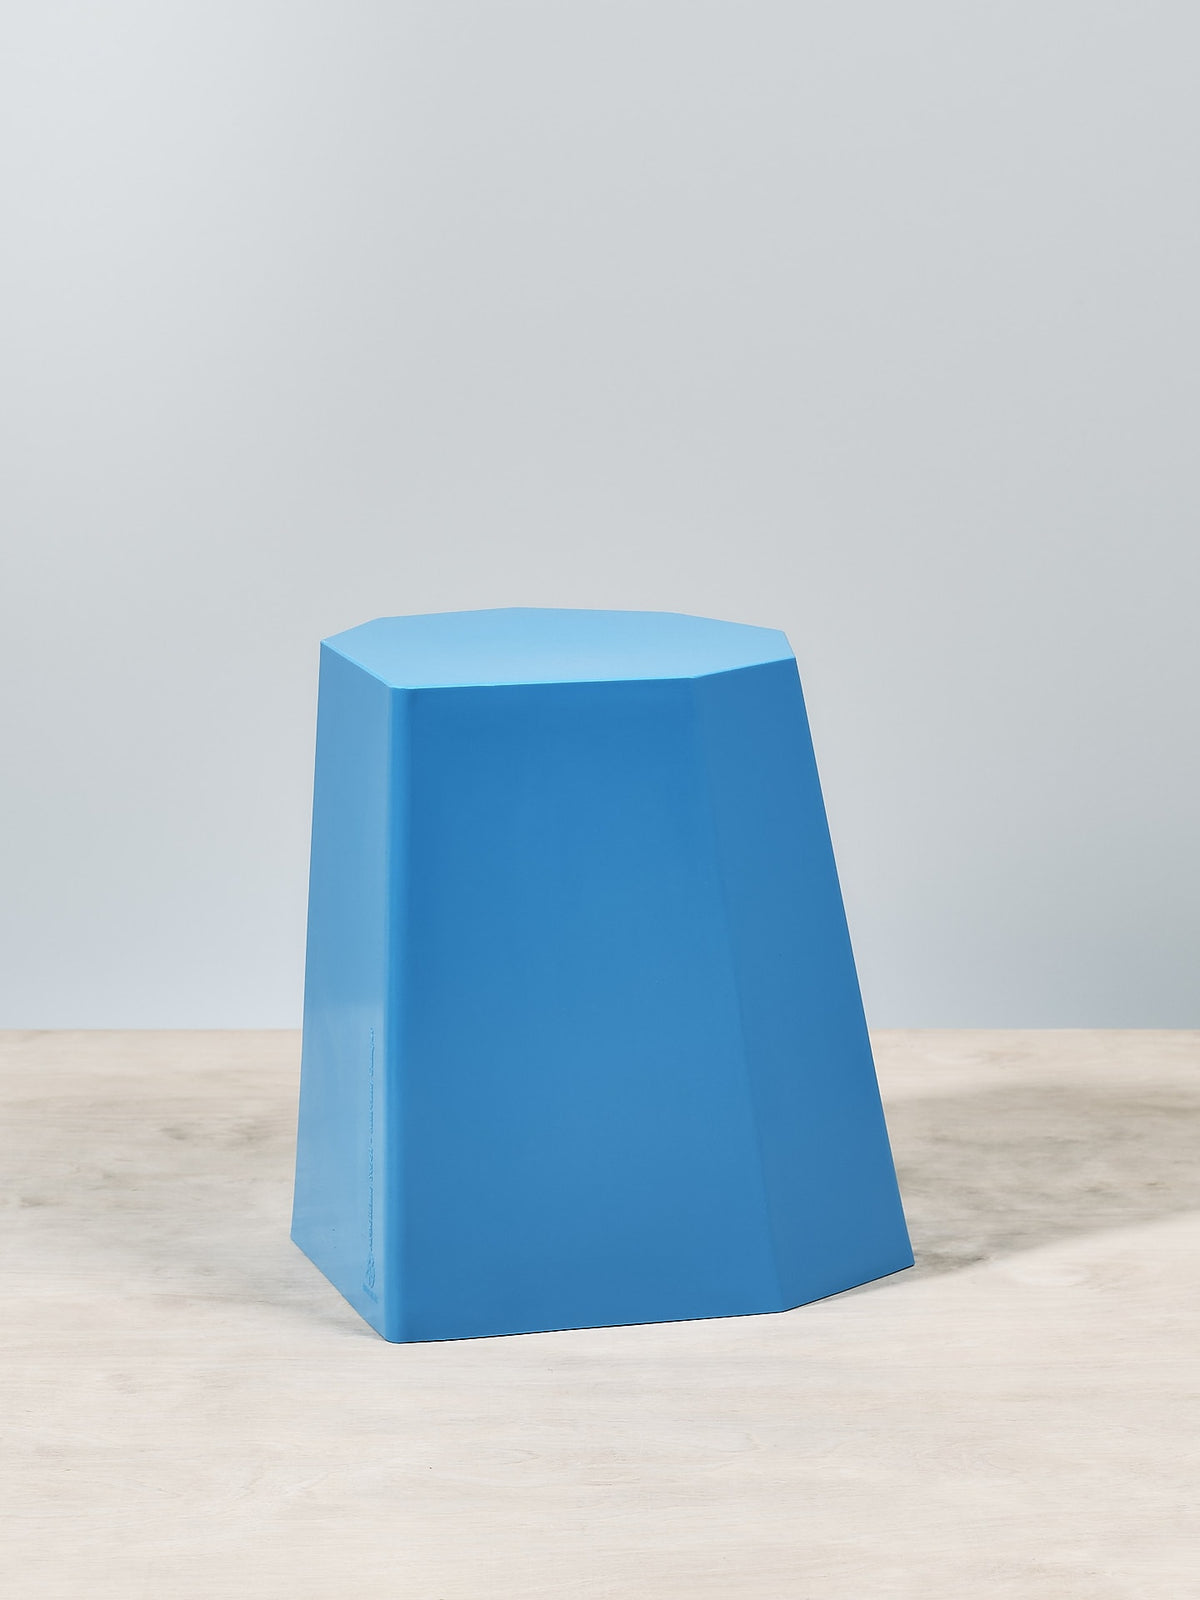 An Arnoldino Stool – Boat Blue sitting on top of a wooden table. (Brand: Martino Gamper)